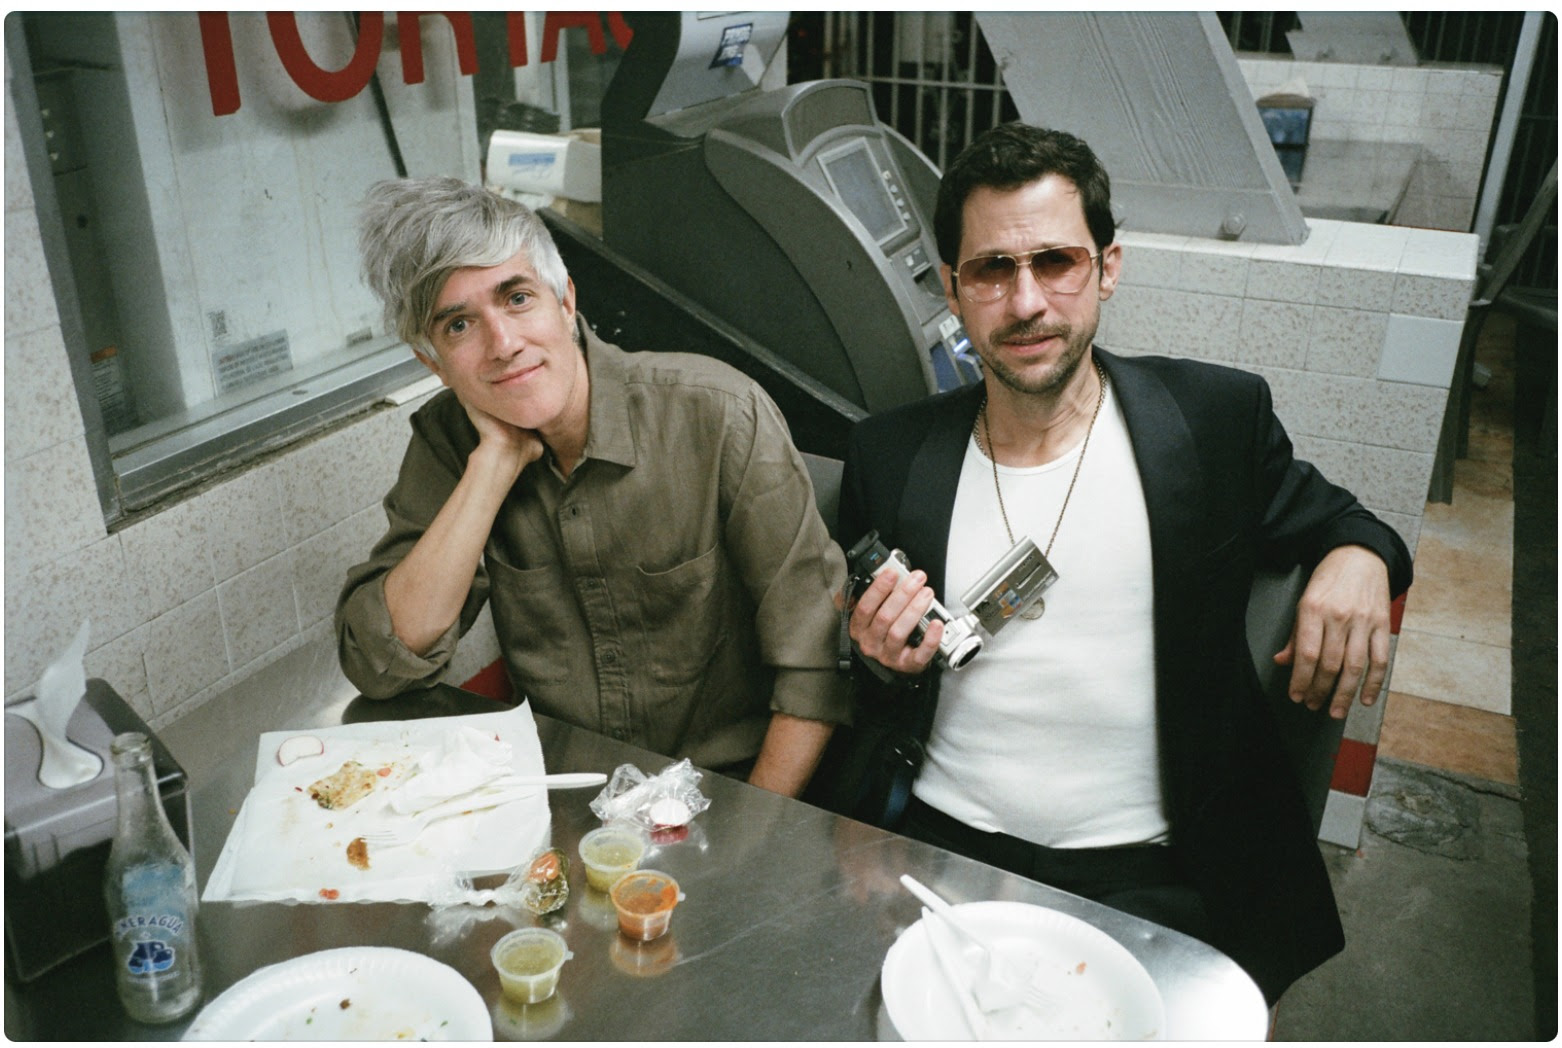 Two members of We Are Scientists sitting at a diner table with empty food containers, one holding a camera. One has grey hair, the other wears a black jacket and sunglasses.